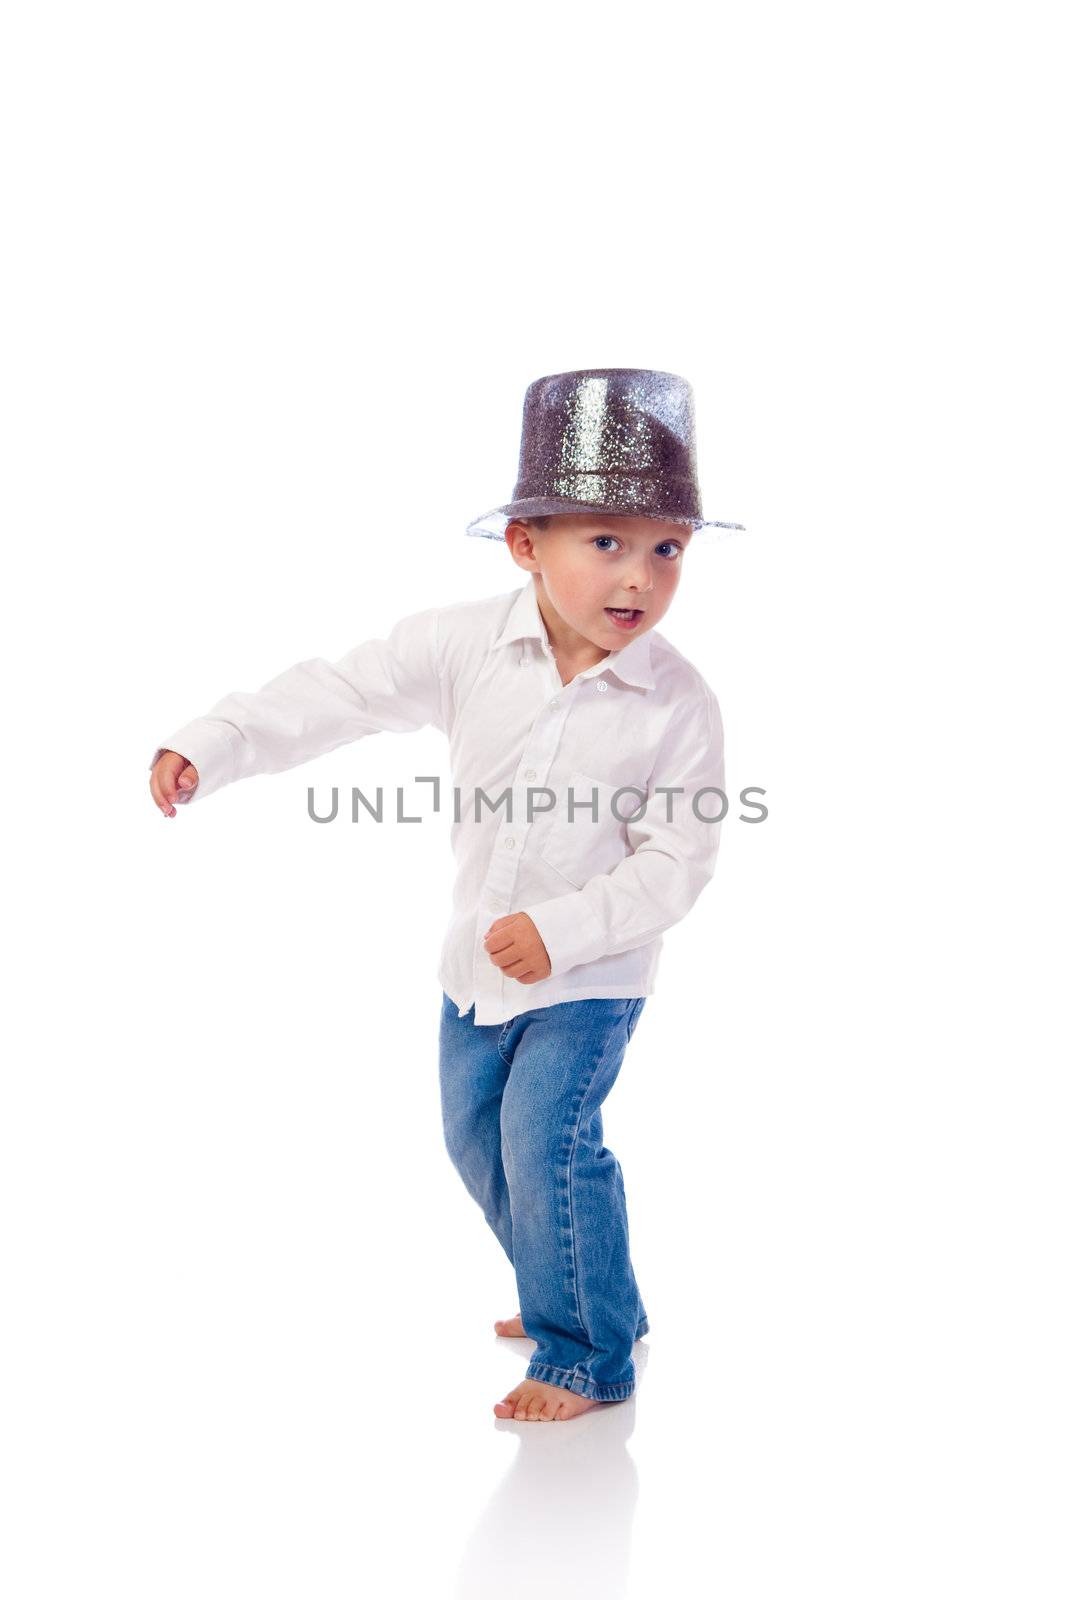 Little boy with a hat dancing